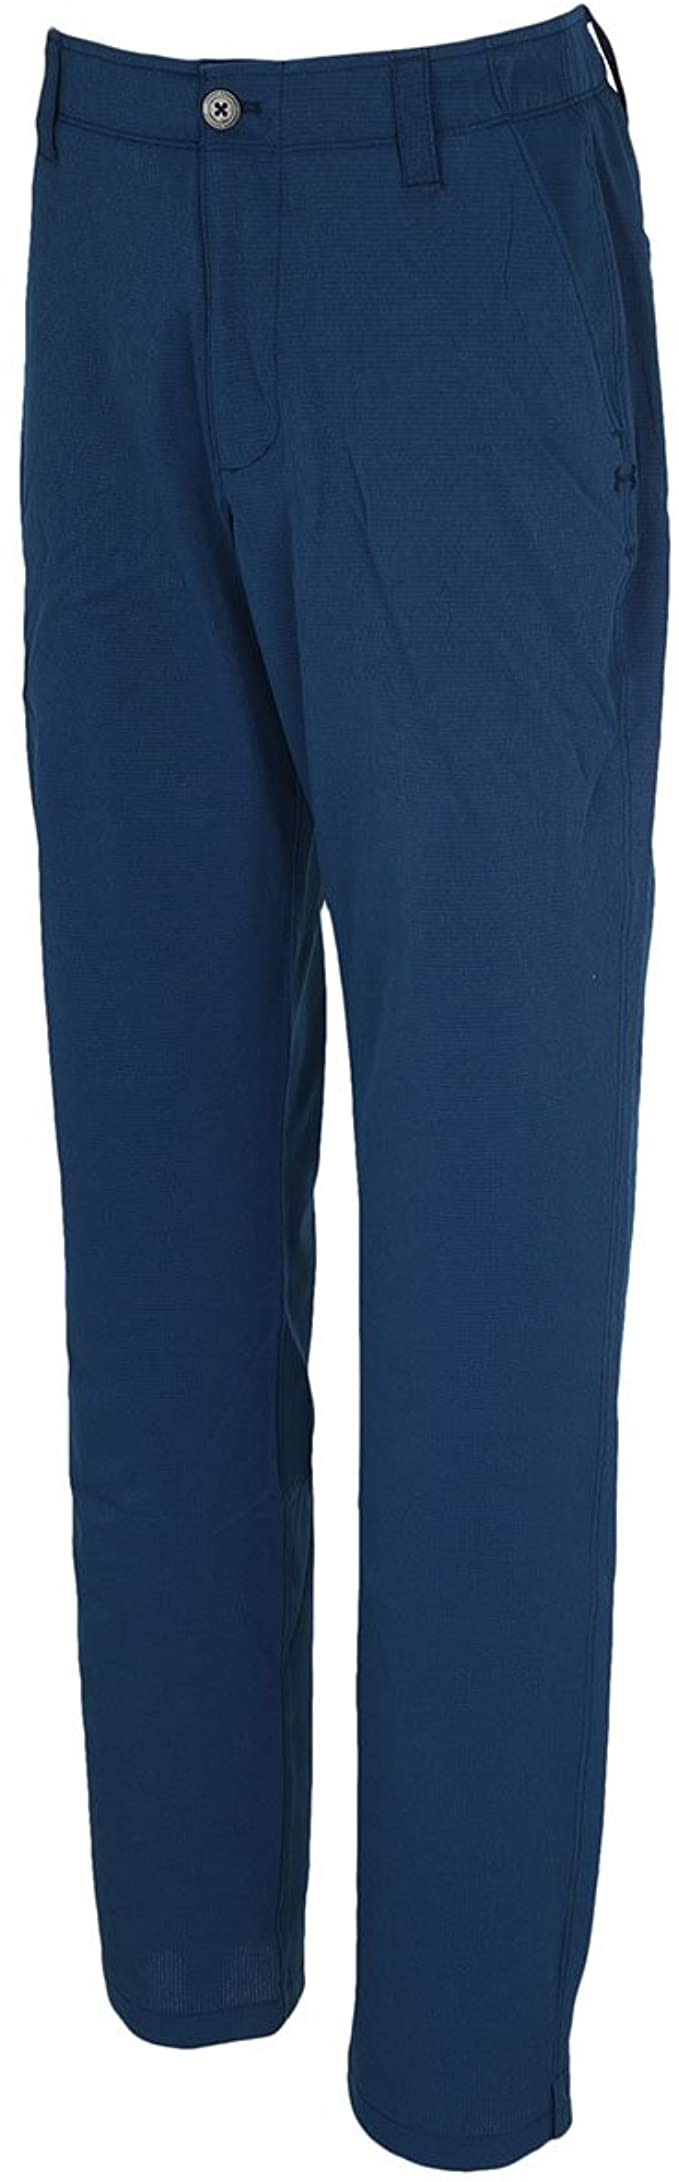 Under Armour Mens Match Play Vented Golf Pants